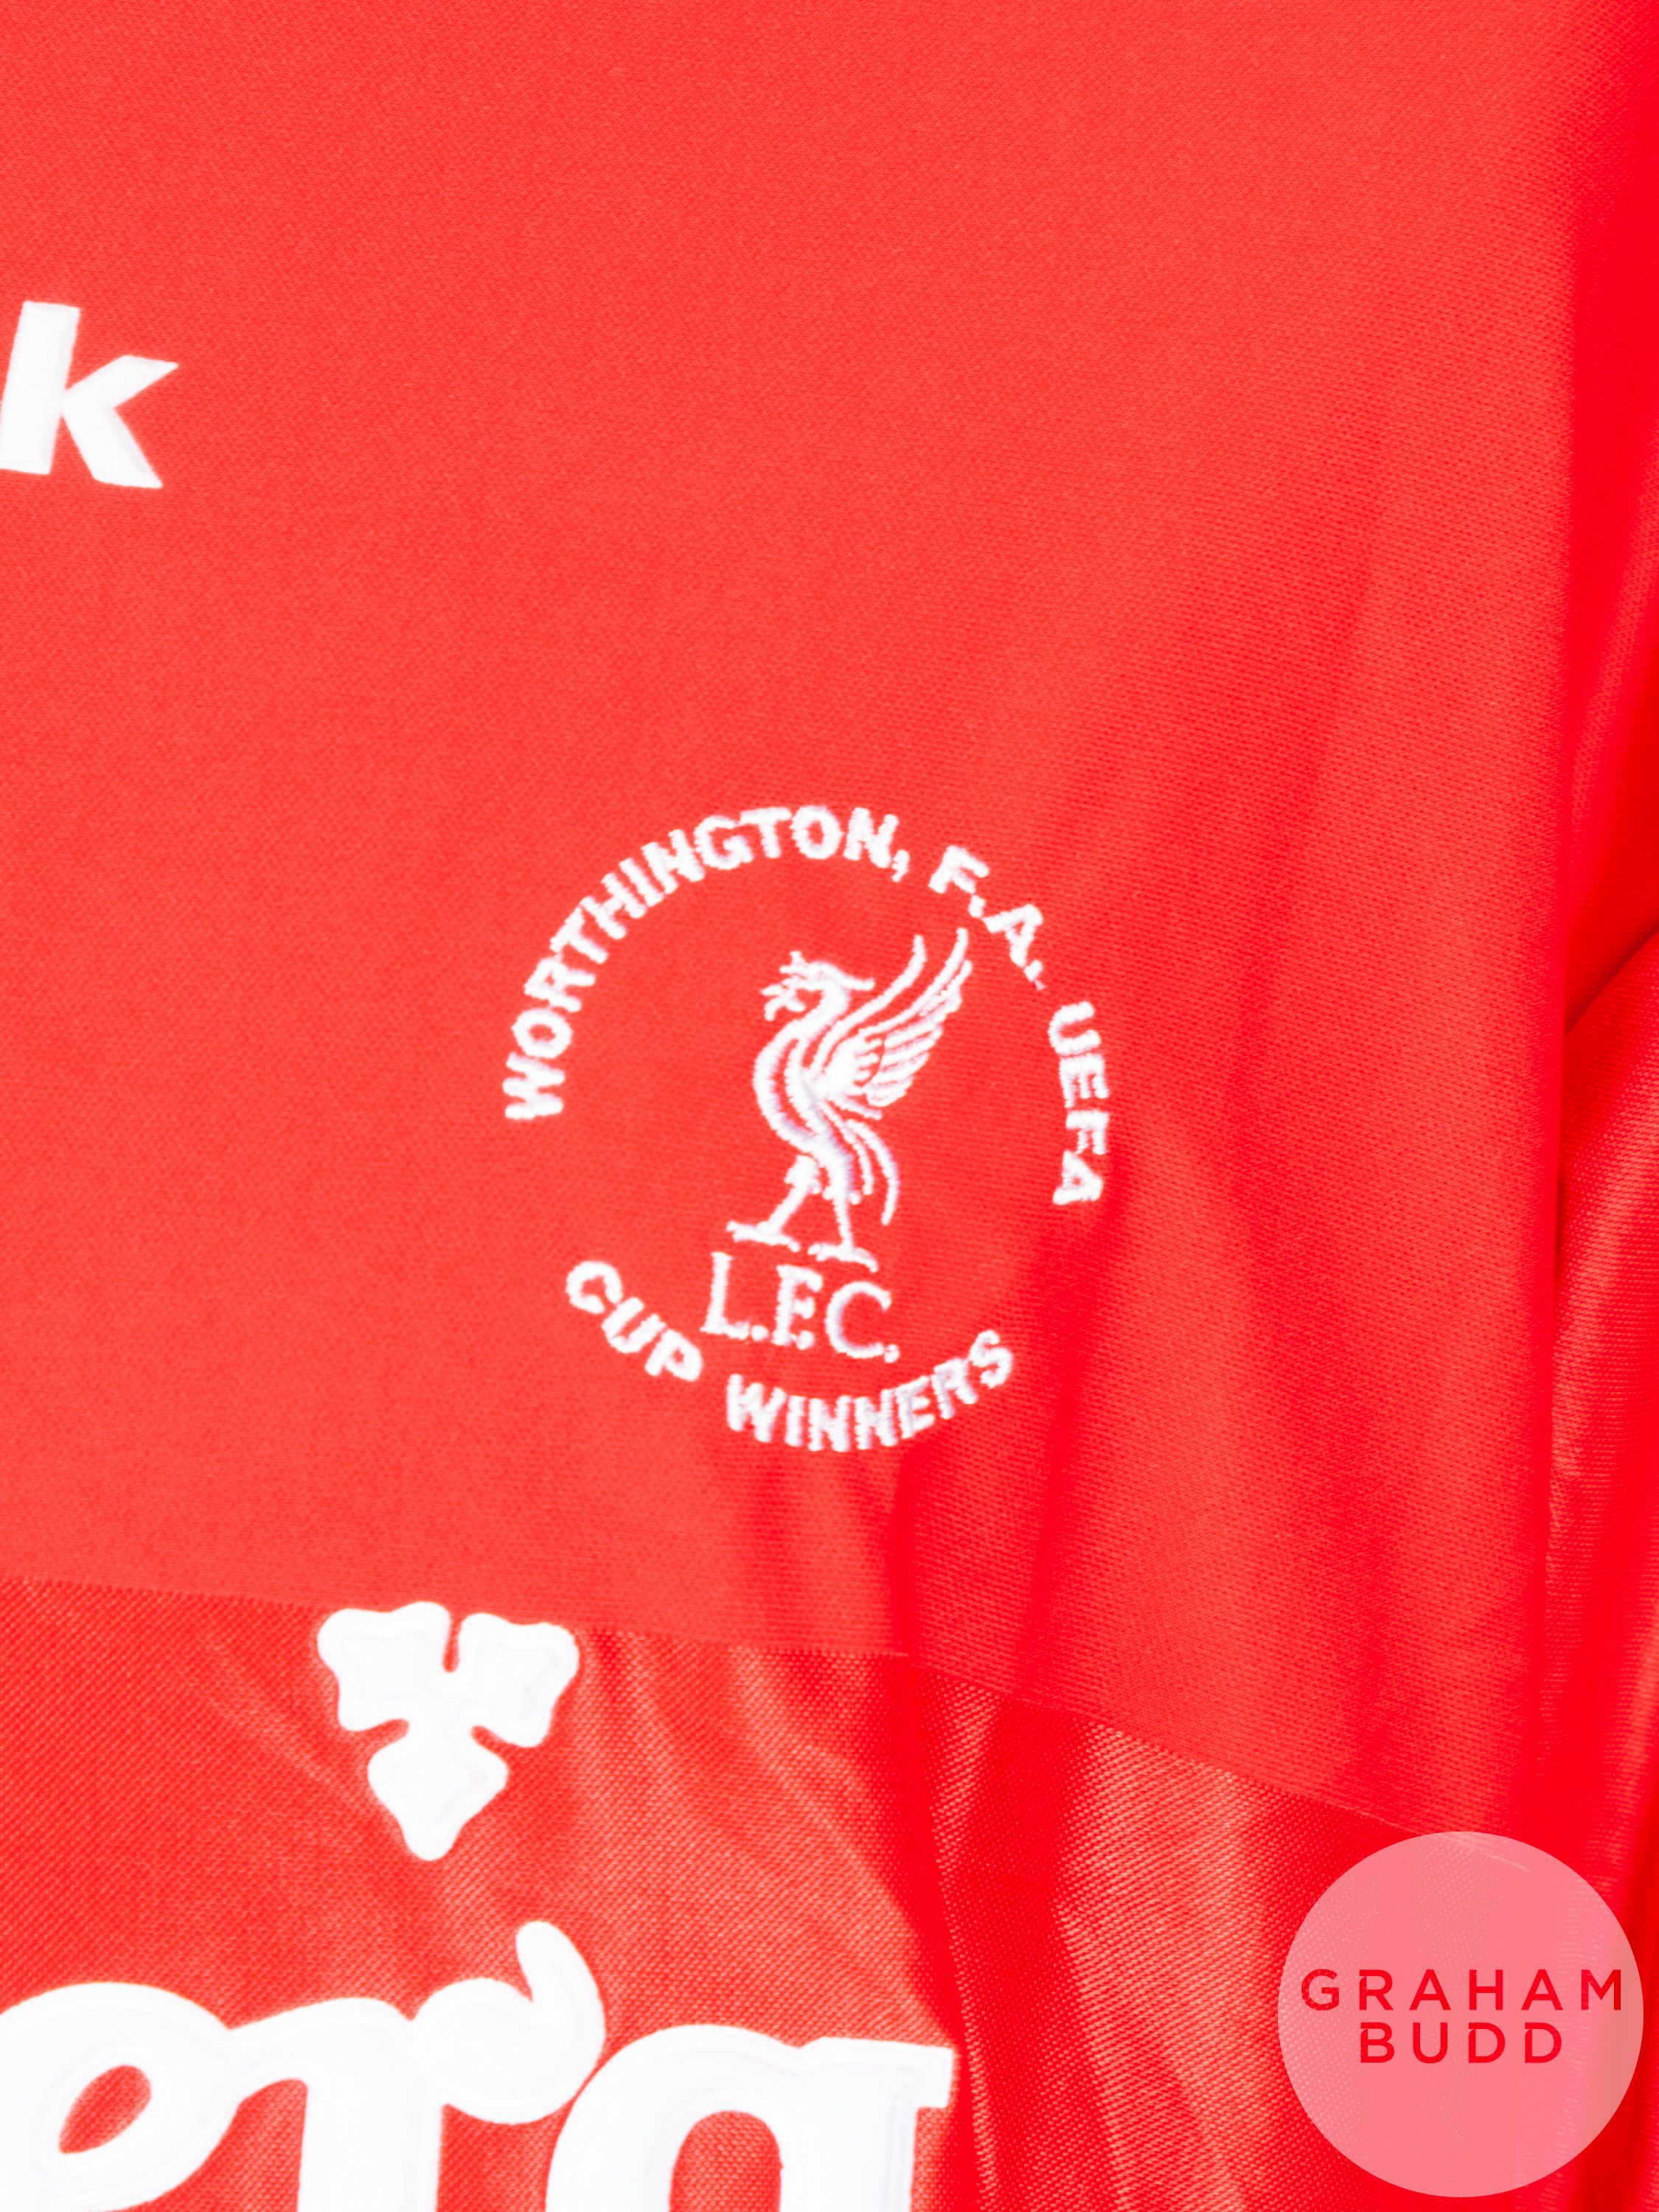 Alex Miller red and white Liverpool Treble Cup-winning commemorative shirt - Image 3 of 4